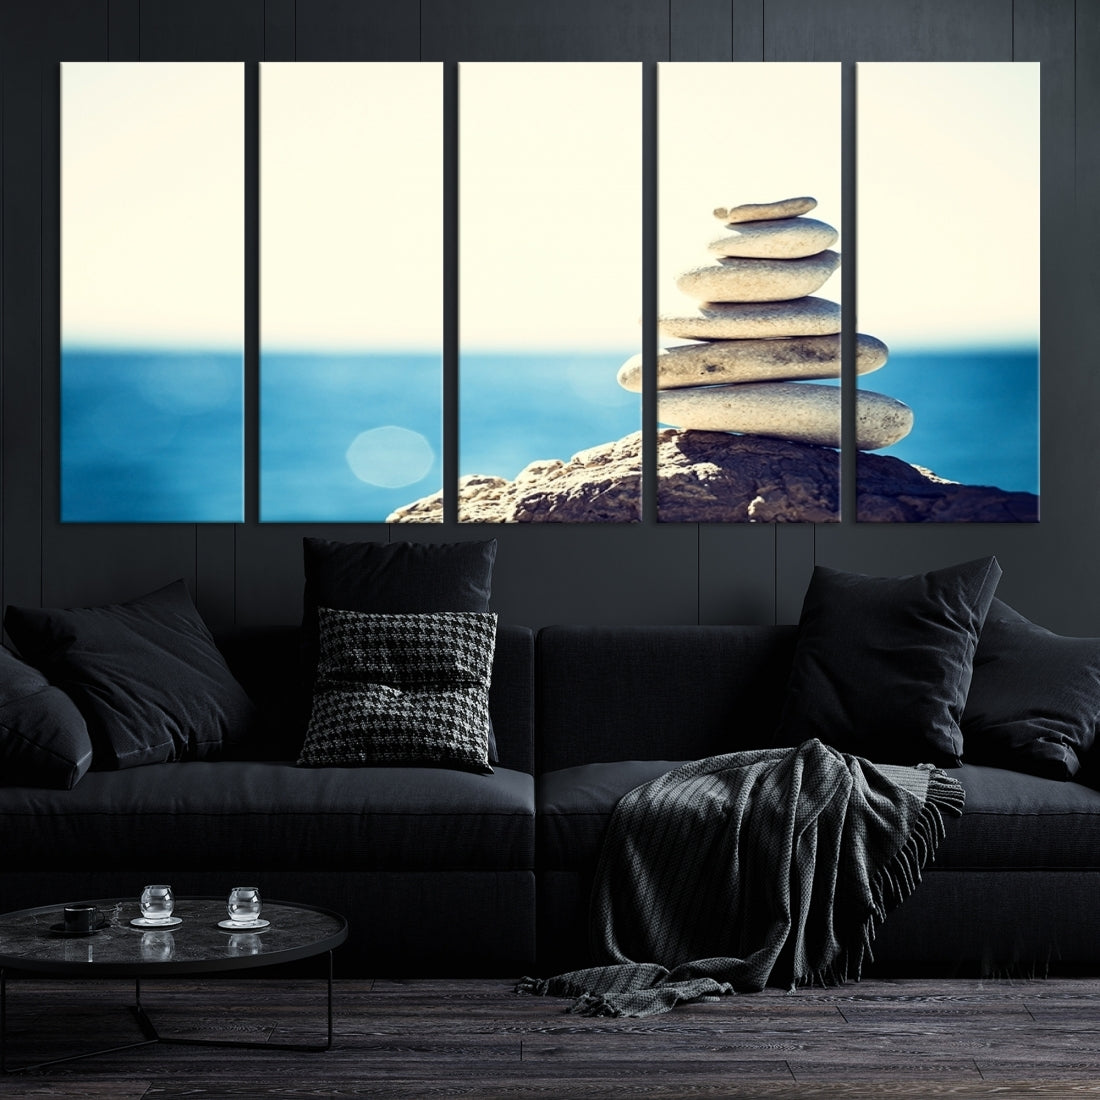 Zen Stones with Bright Sea and Sunshine on Background